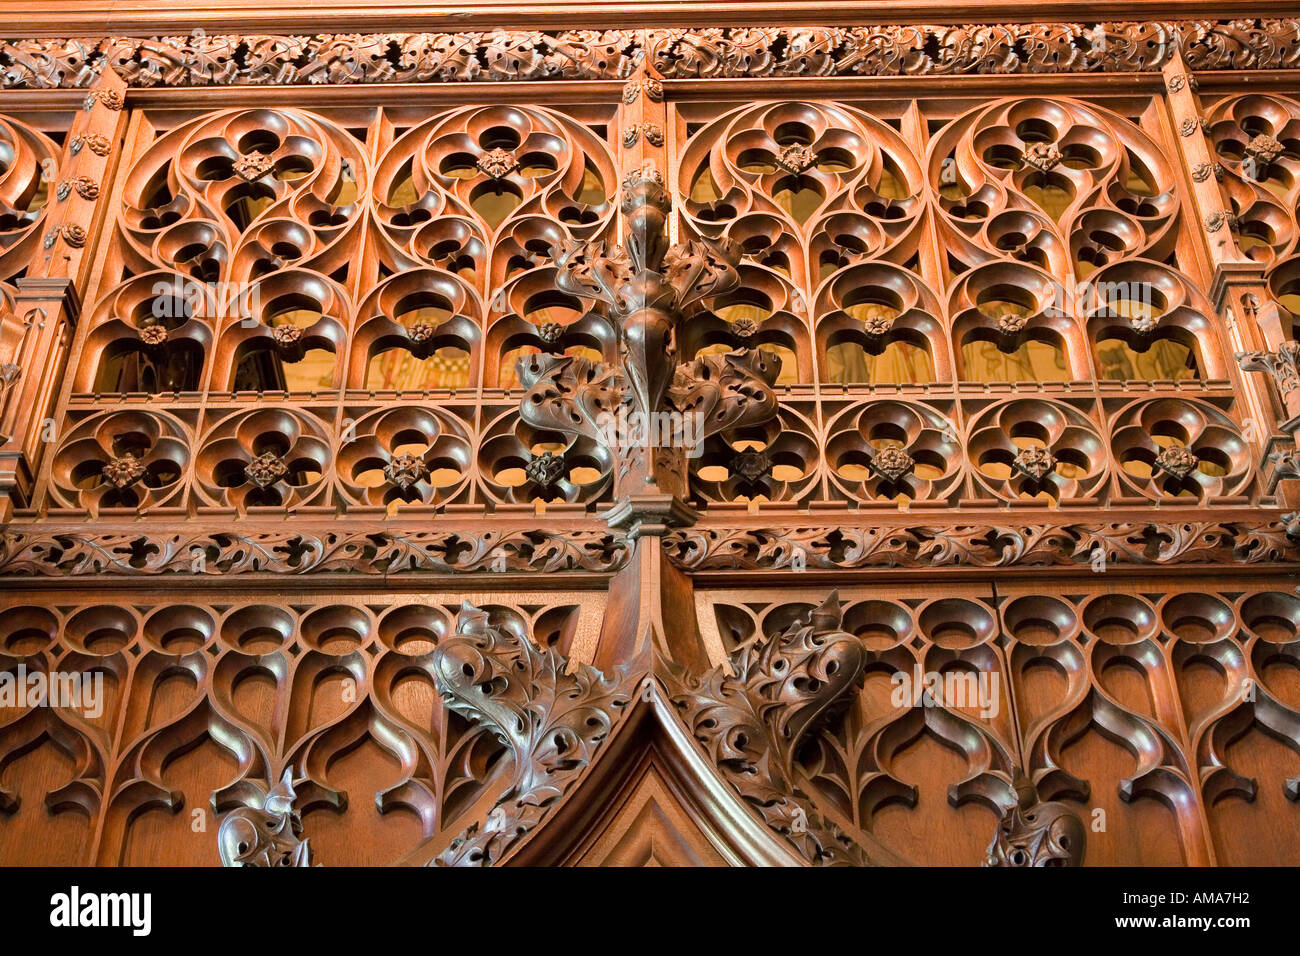 Wales Cardiff Cardiff Castle Bankett Hall Spielleute Gallery carving-detail Stockfoto